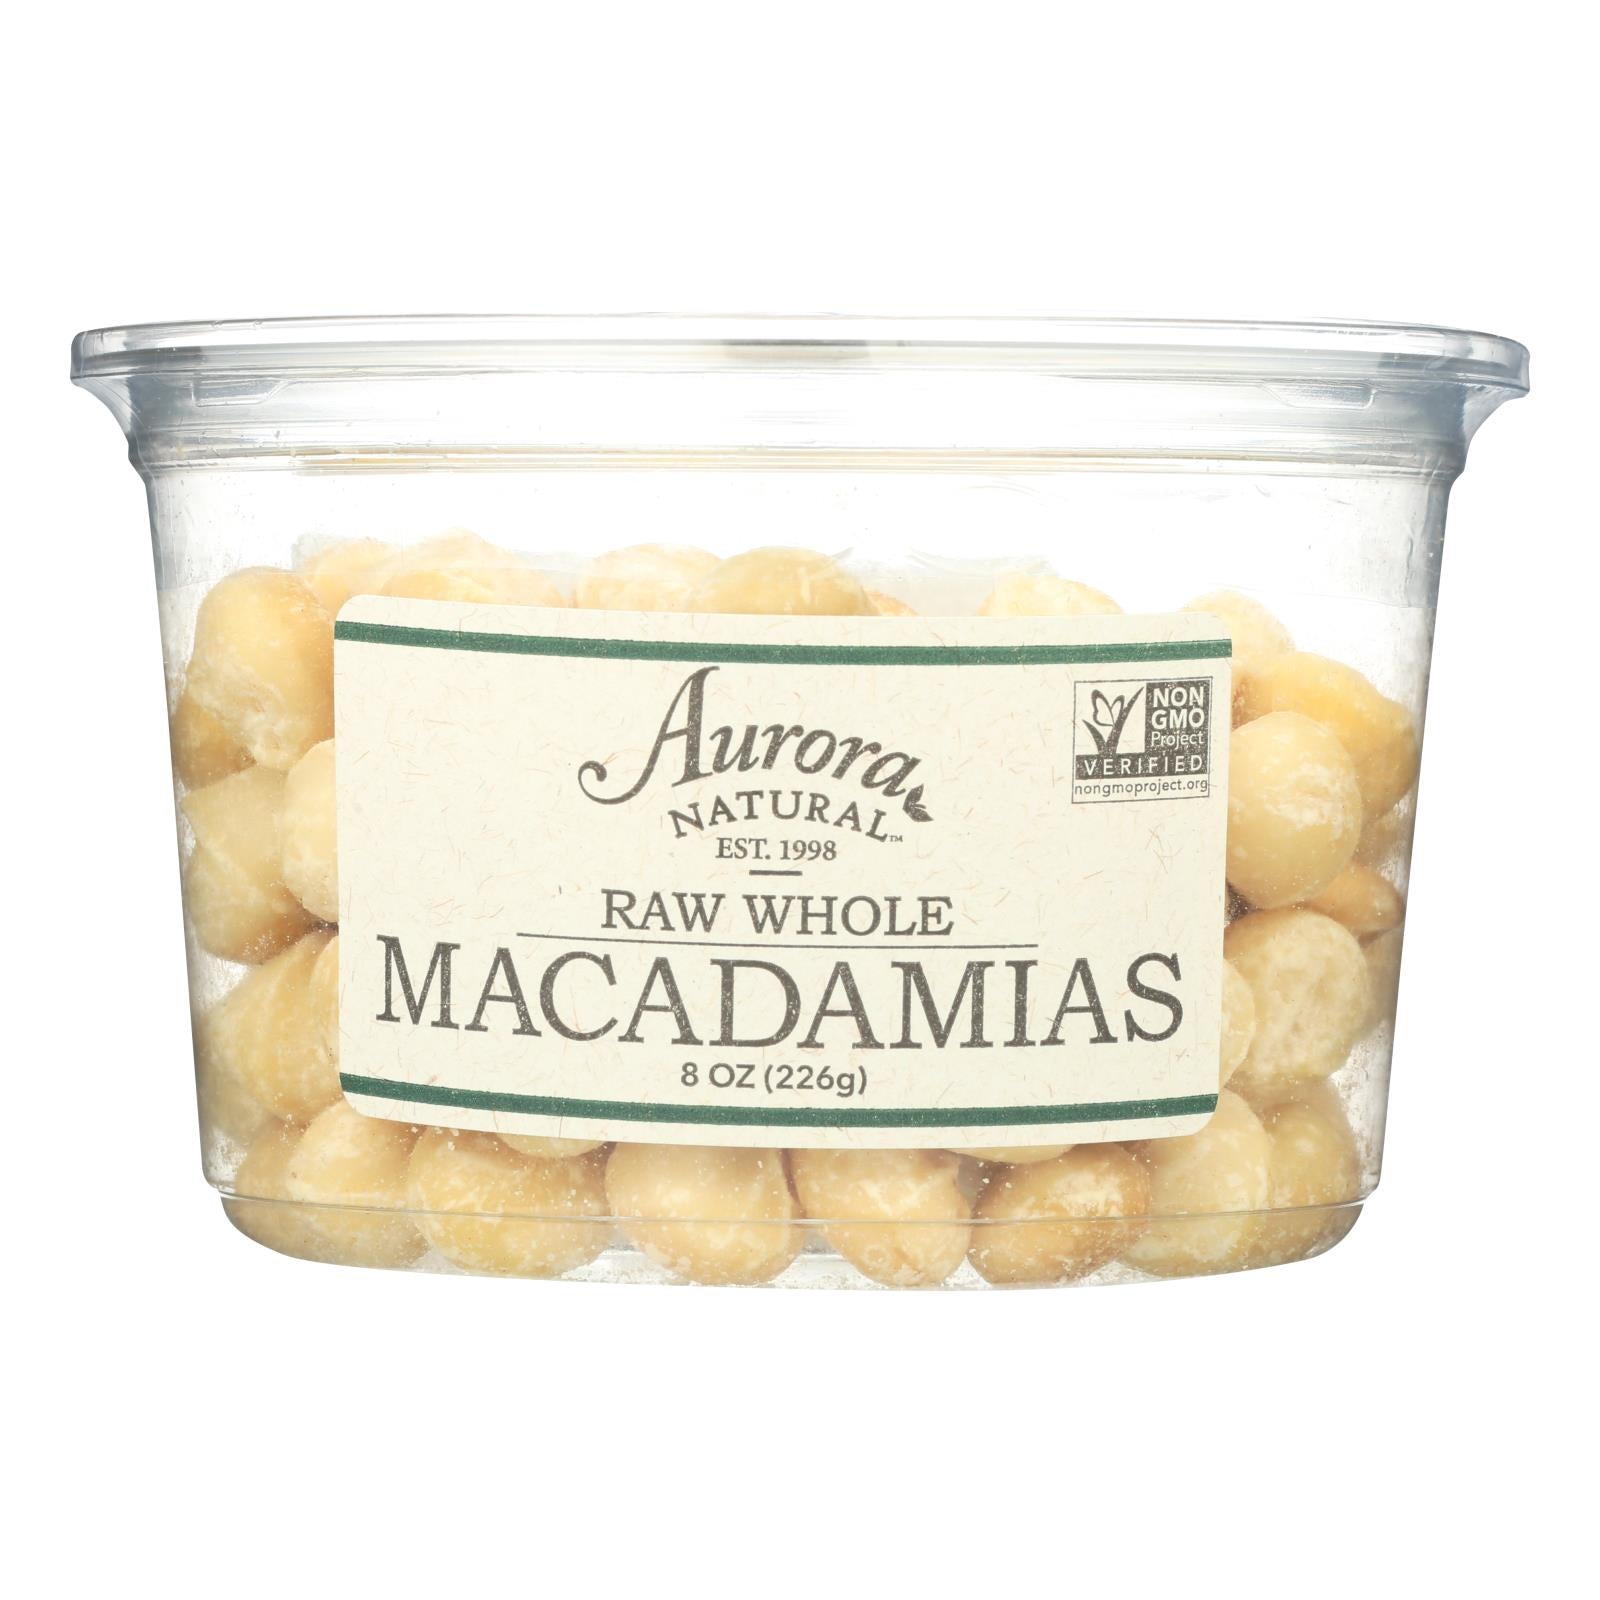 Aurora Natural Products, Aurora Natural Products - Raw Whole Macadamias - Case of 12 - 8 oz. (Pack of 12)